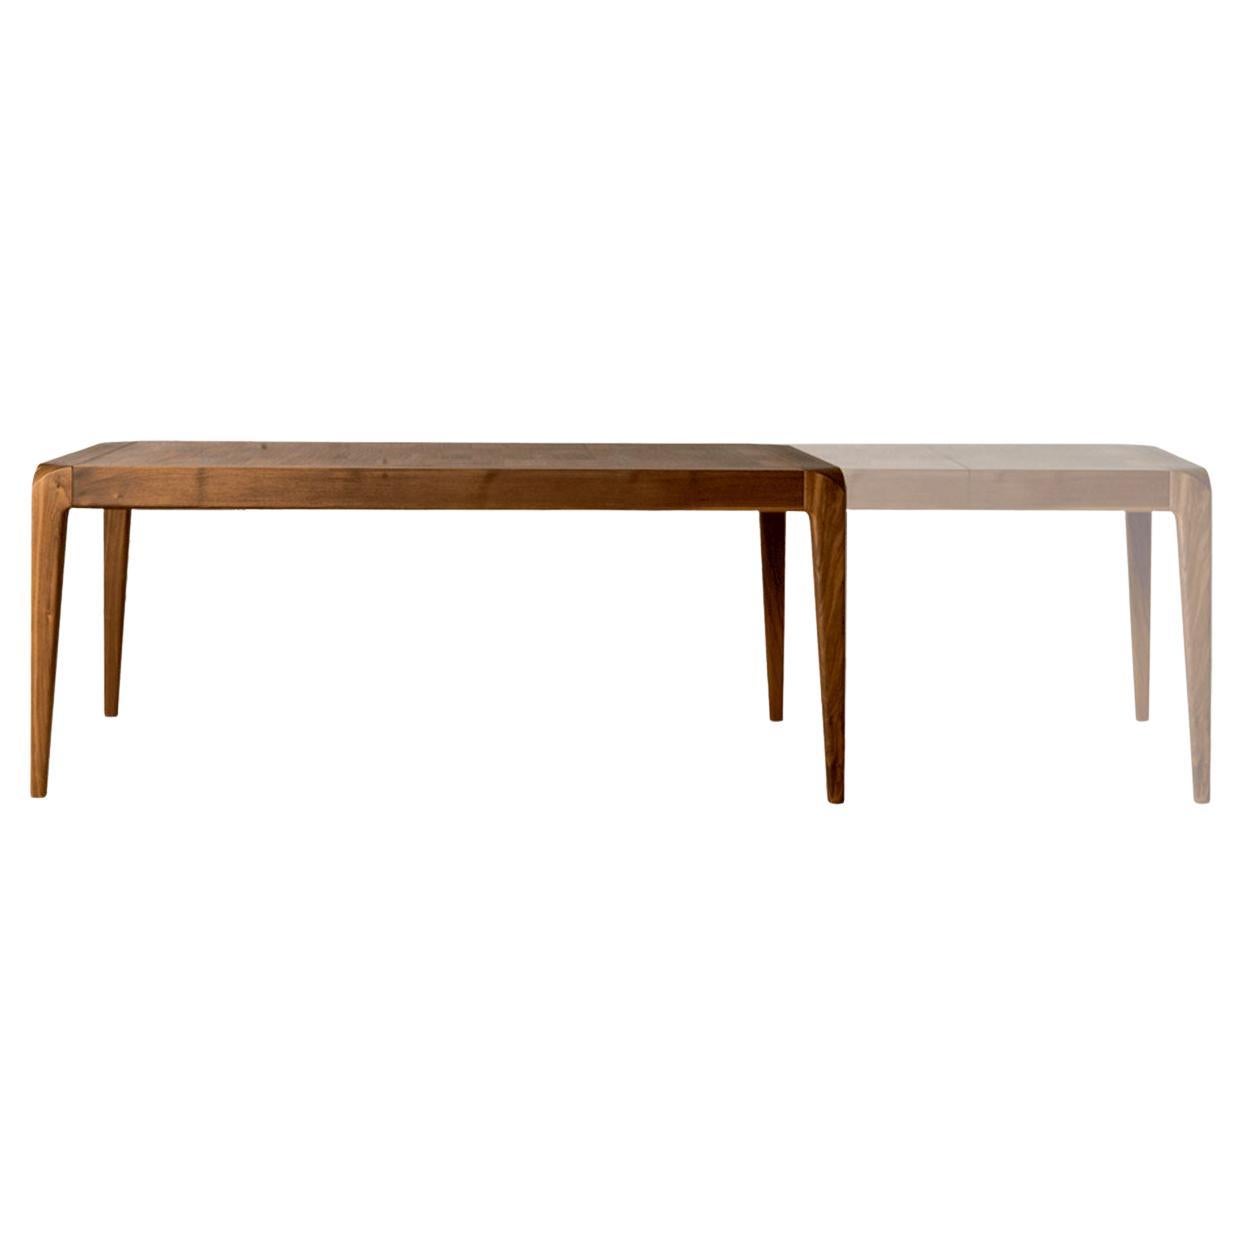 Sentiero Solid Wood Table, Walnut in Hand-Made Natural Finish, Contemporary